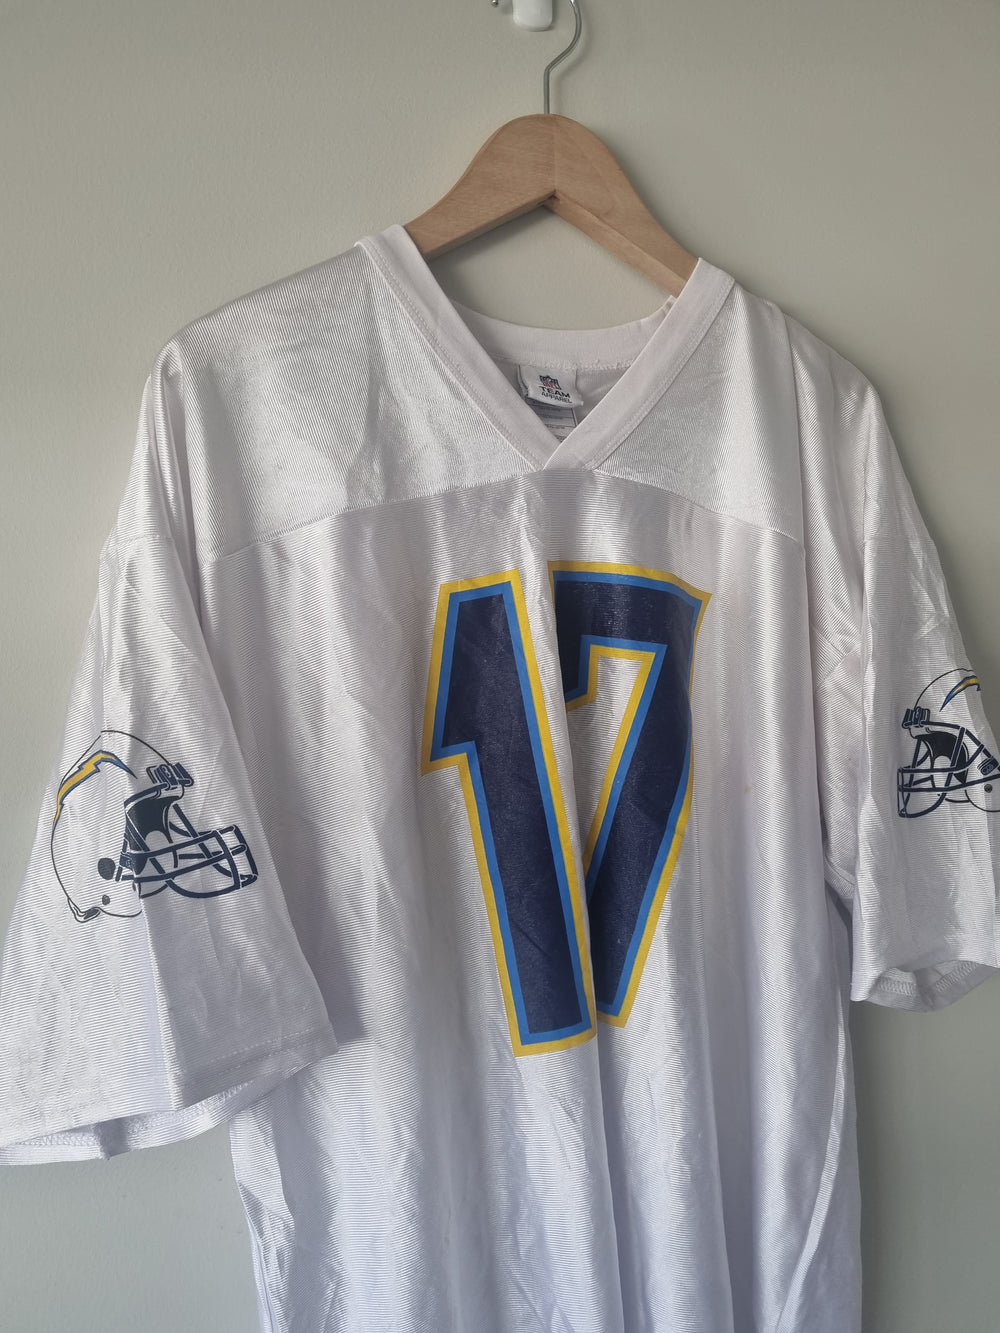 San Diego Chargers Rivers Team Apparal XL